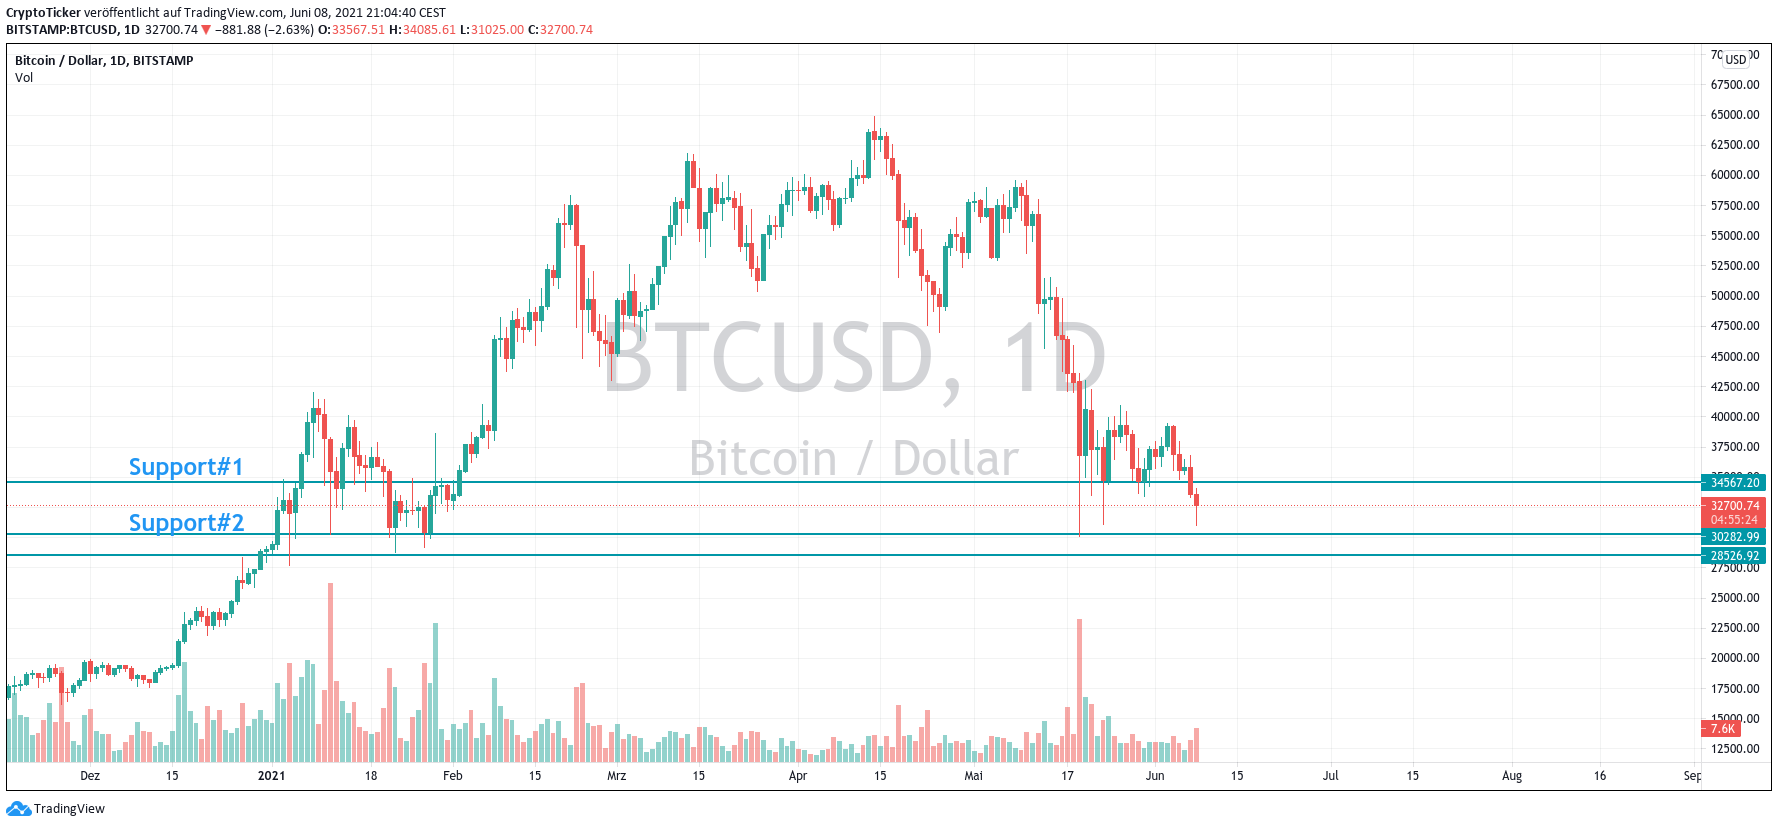 BTC/USD 1-day chart showing Bitcoin's Price Action 